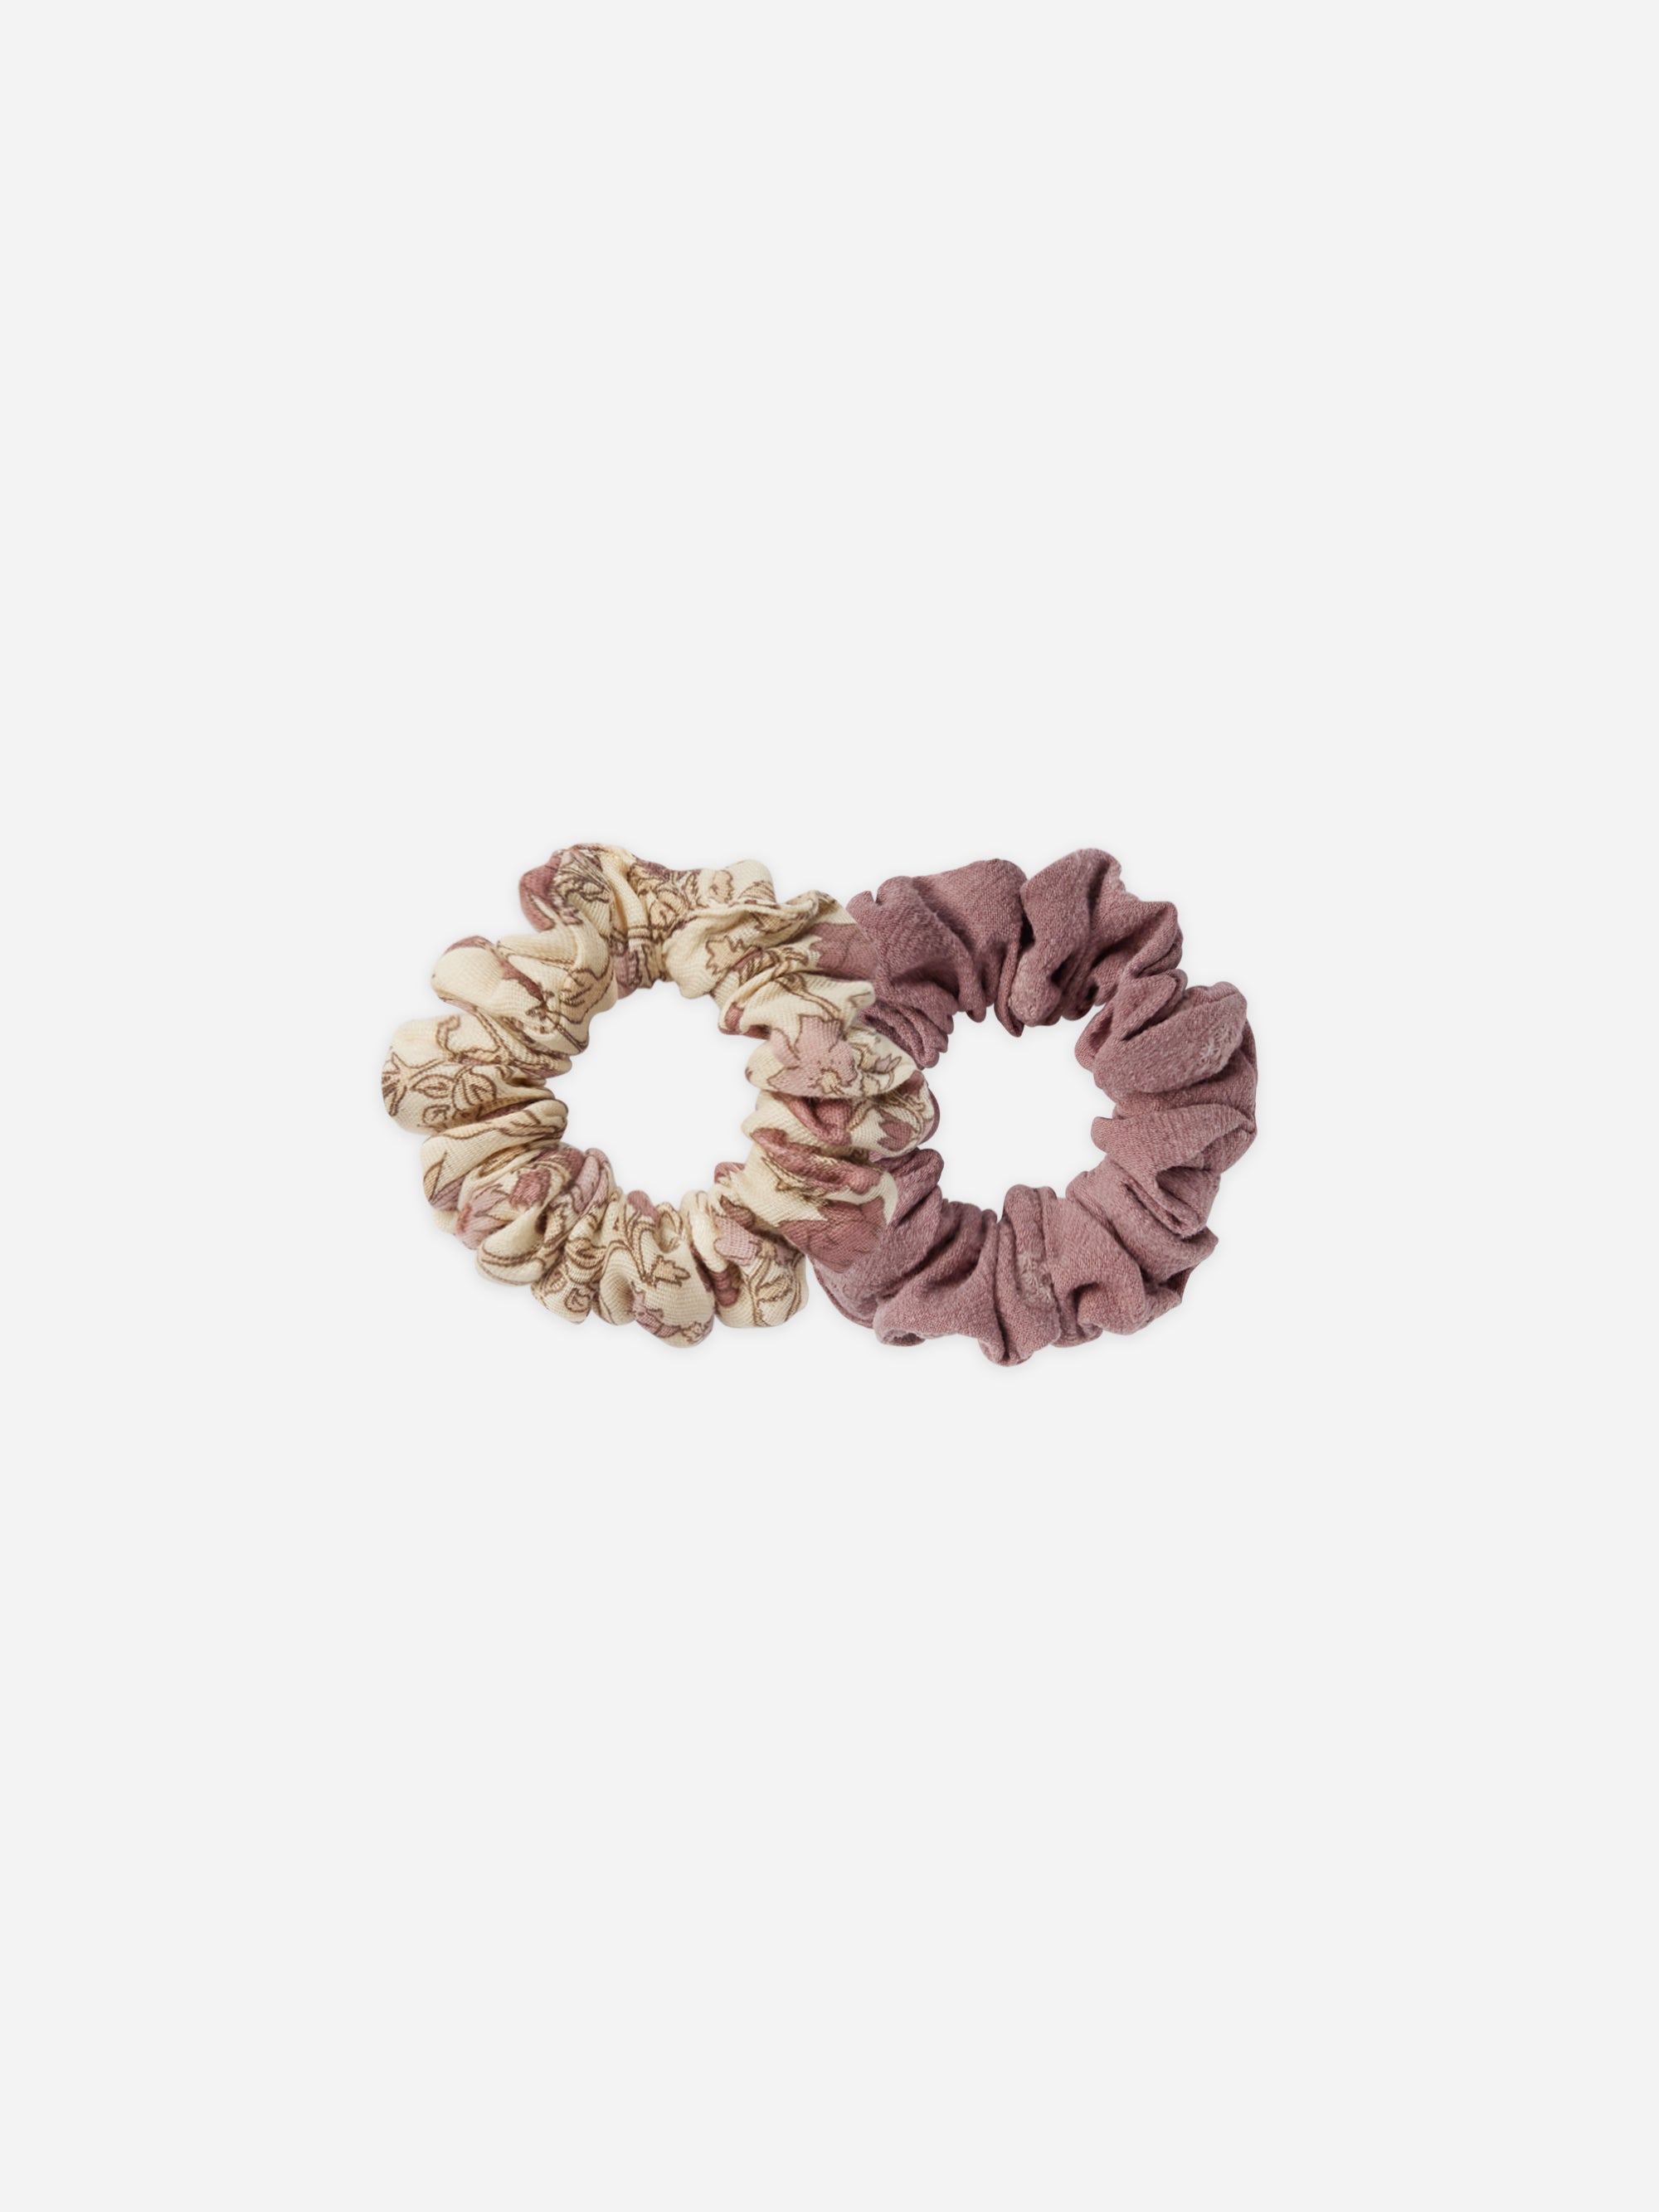 Scrunchie Set || Bloom, Mulberry Daisy - Rylee + Cru | Kids Clothes | Trendy Baby Clothes | Modern Infant Outfits |